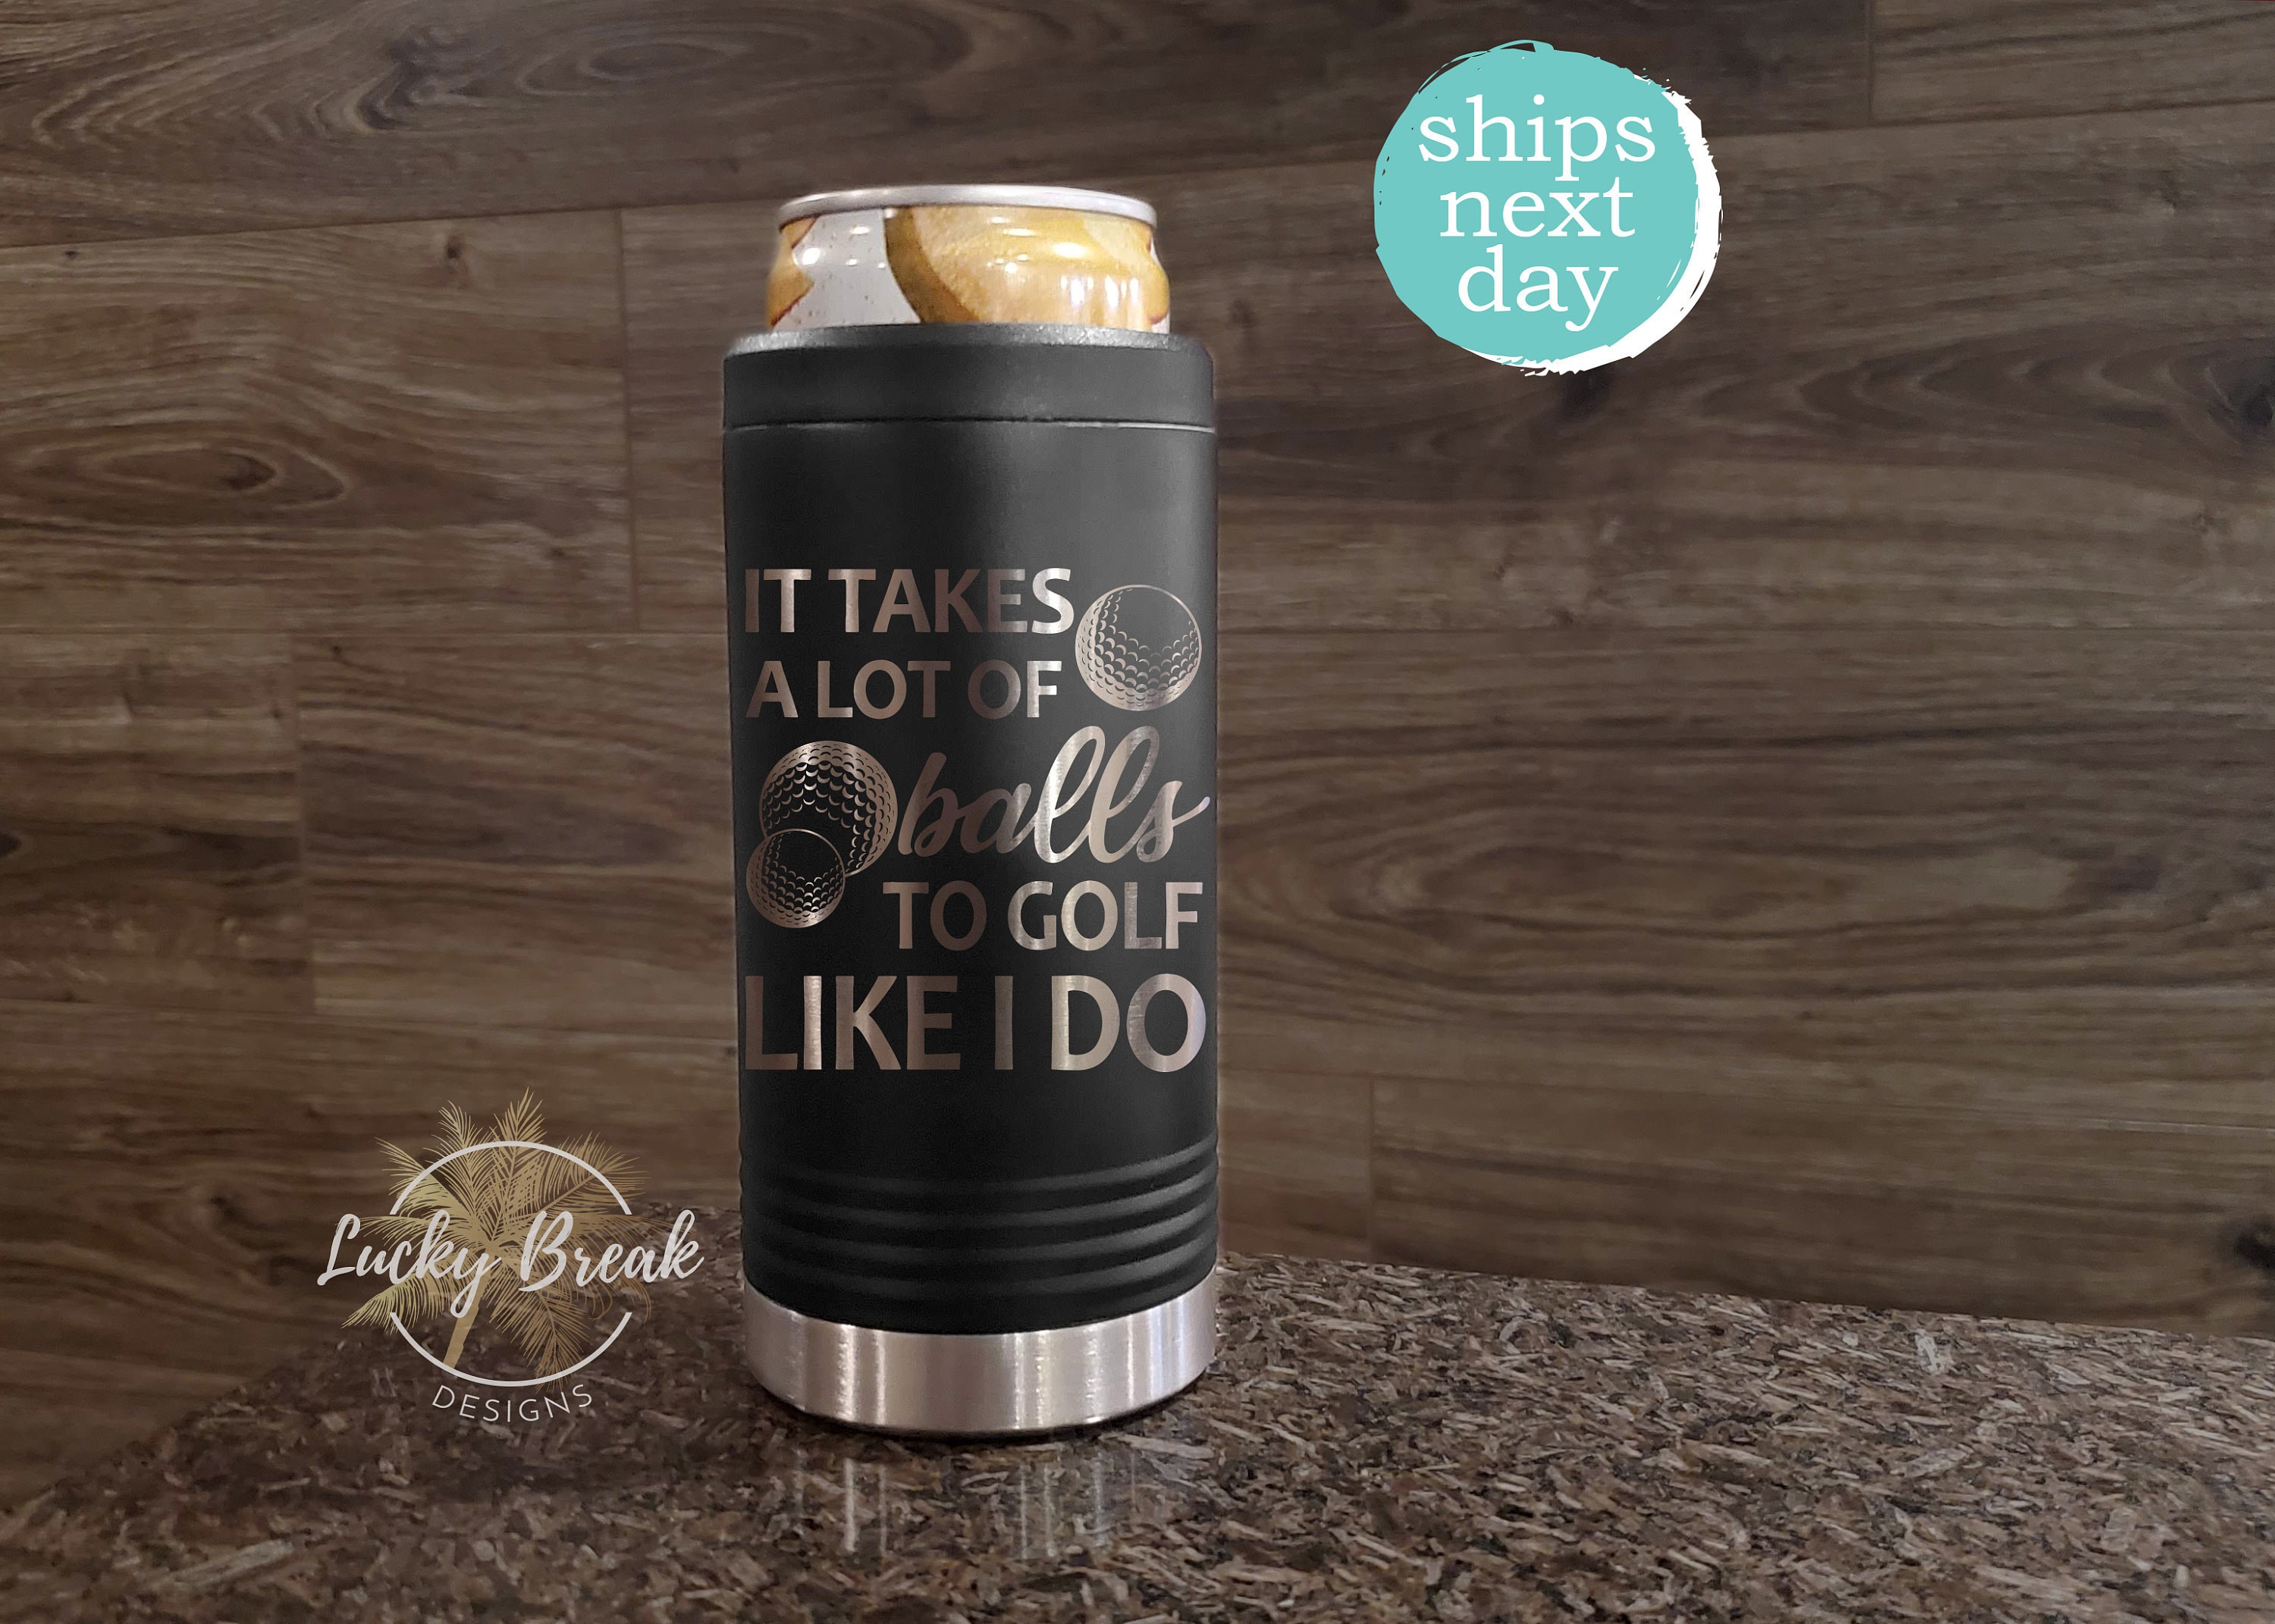 Truly ---- Wasted - Skinny Can Koozie - Fun Love Designs